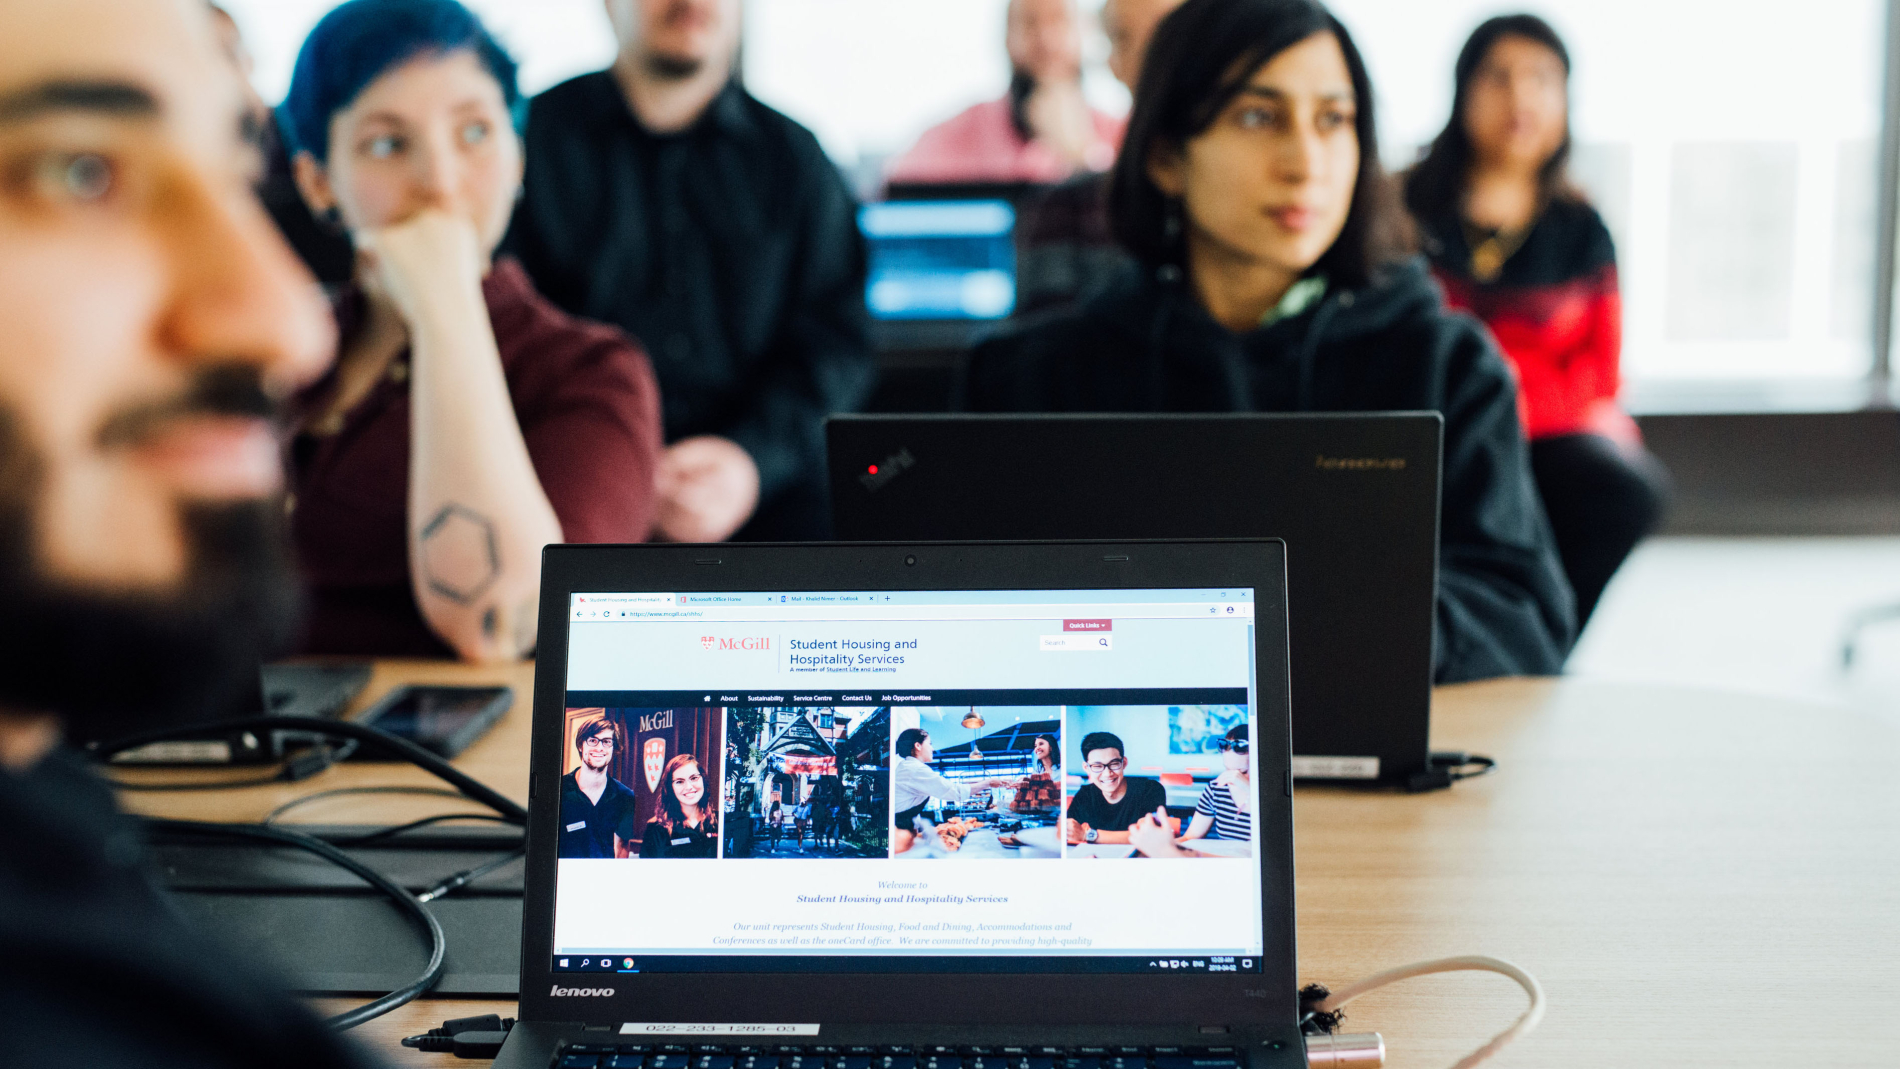 Students sitting at a desk in a classroom with a laptop screen in front of them, a McGill website is displayed on the screen.